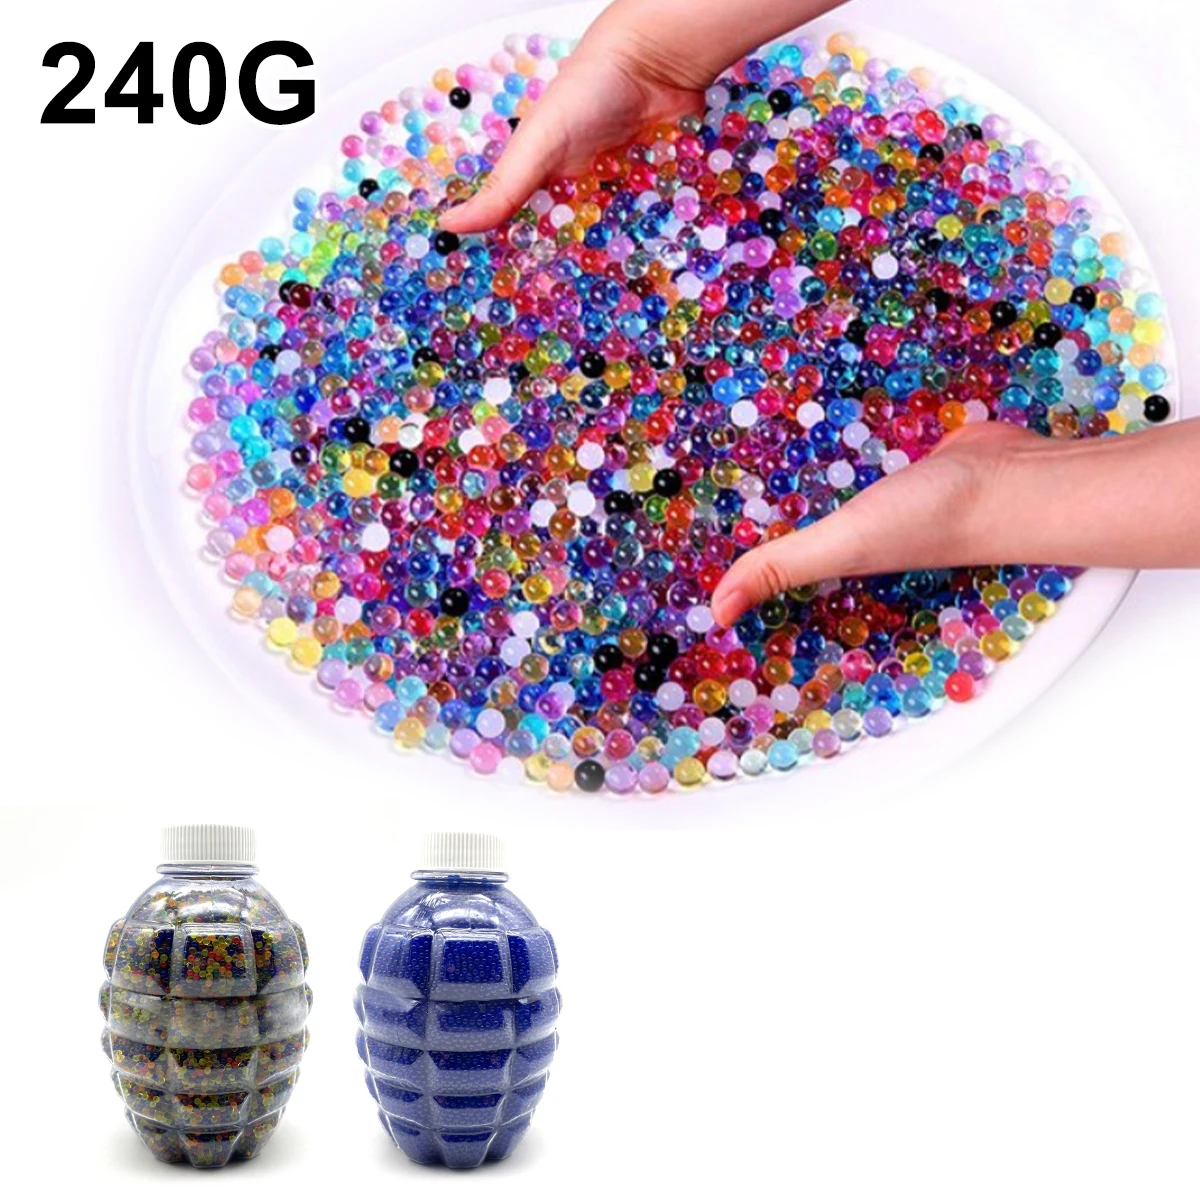 

new Gel Blaster Pistol Toy Ammo Kit with 20,000 Pcs Water Balls Beads Refill Ammo Pineapple Bottle 7-8mm Water Bullets Beads